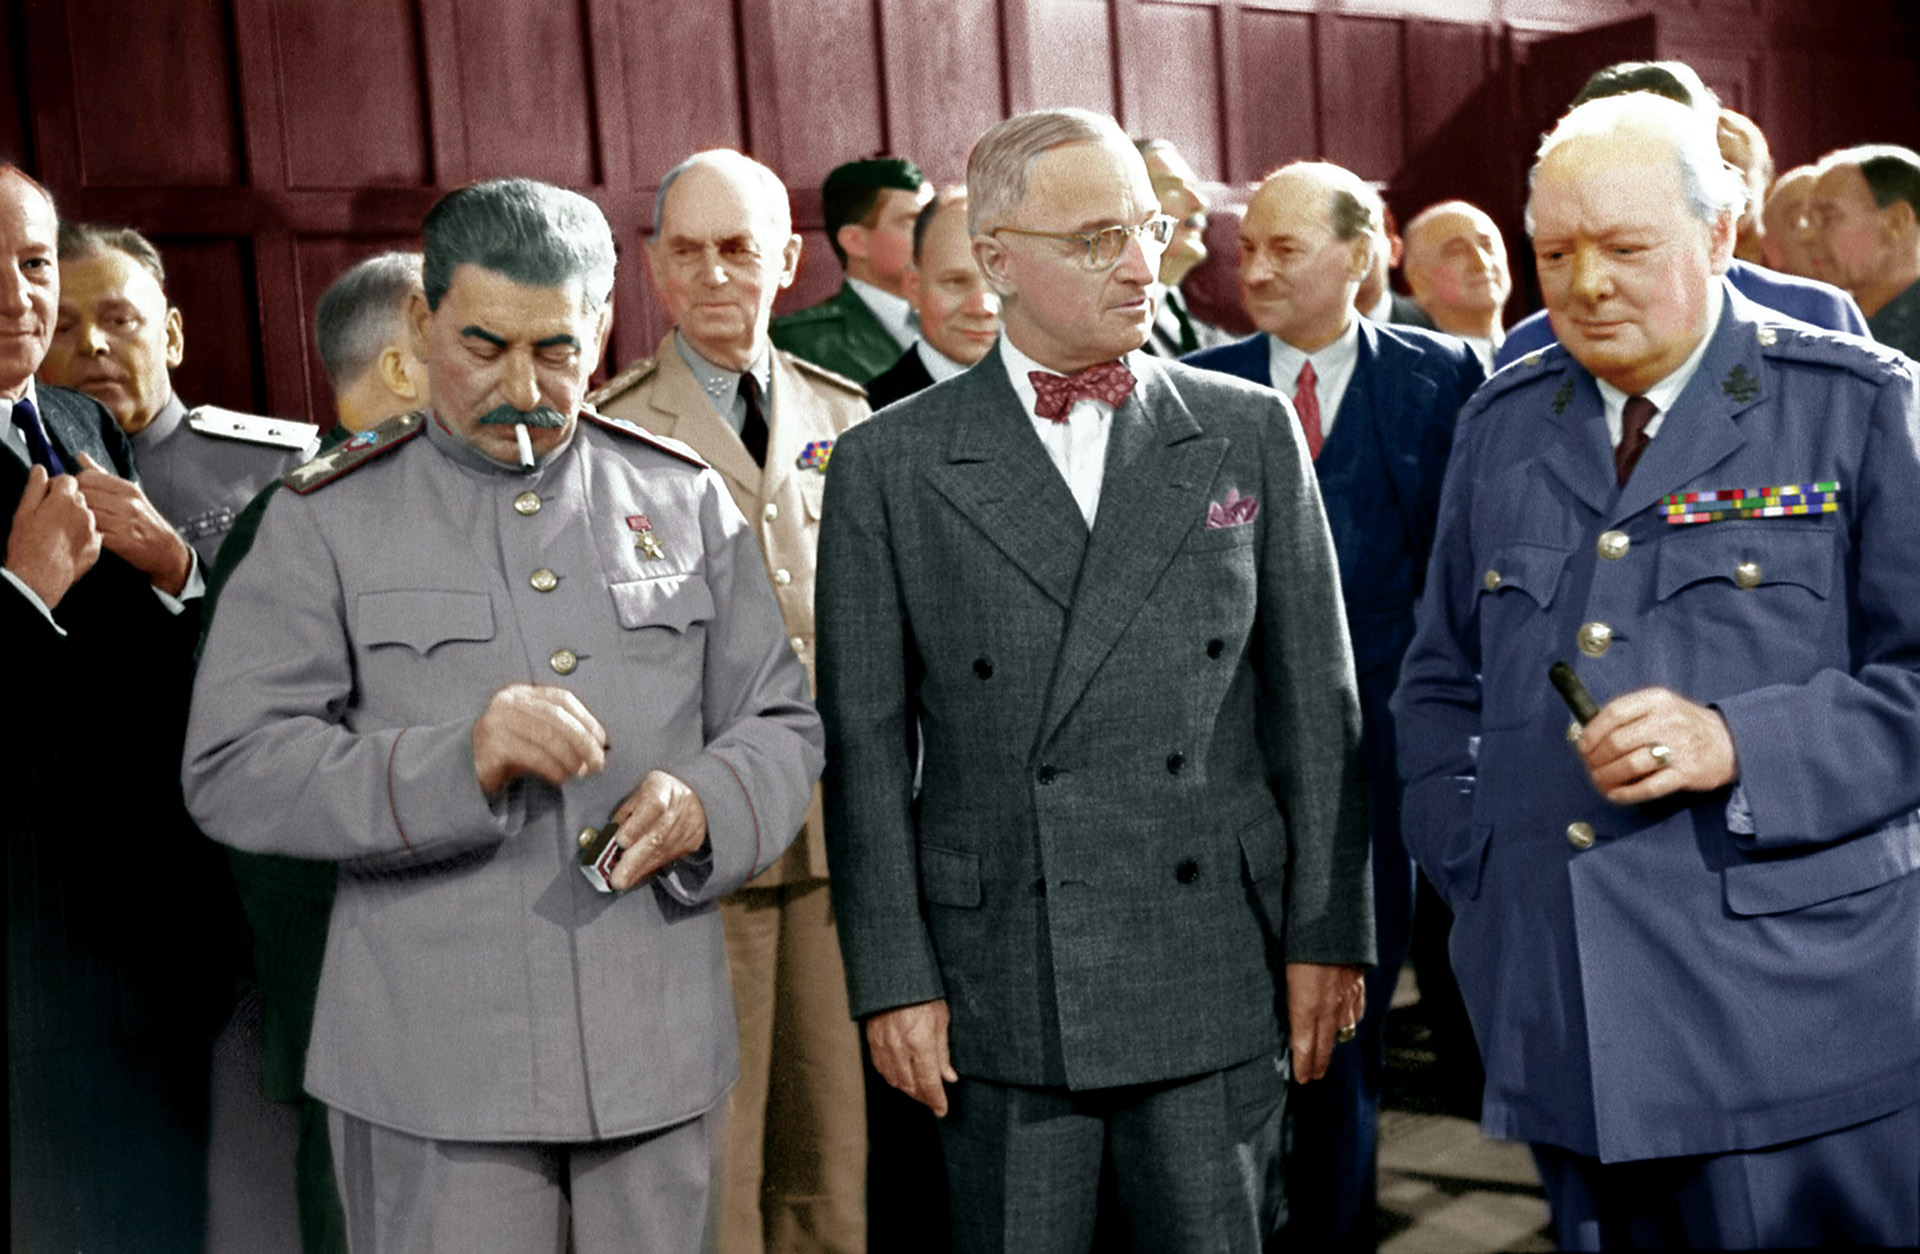 Soviet Premier Josef Stalin, U.S. President Harry Truman, and British Prime Minister Winston Churchill (left to right) pause following a meeting during  the Potsdam Conference held July-August 1945.  At Potsdam issues concerning the map of post-World War II Europe and spheres of influence were  discussed.  Churchill was voted out of office during the conference and replaced by Clement Attlee, while Truman had assumed the U.S. presidency after the death of Franklin D. Roosevelt.